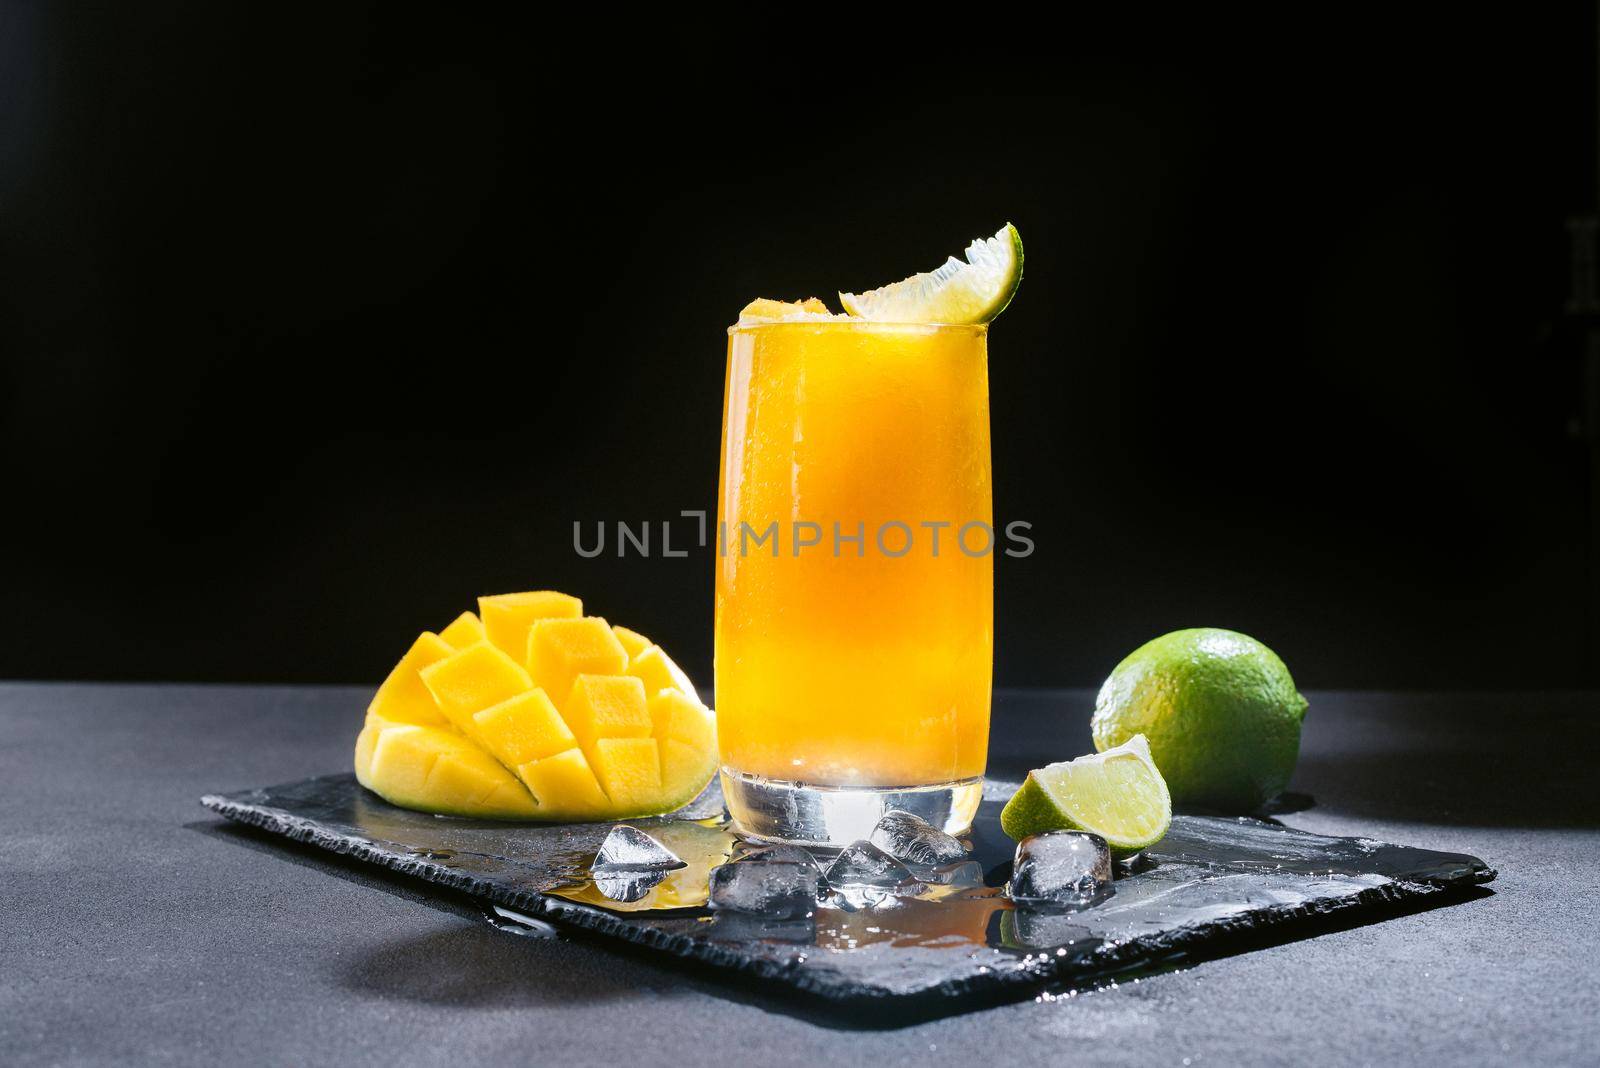 A Mexican smoothie drink made from mango, chili peppers, salt, and lime. A refreshing summer smoothie on a black background of bright orange. by gulyaevstudio